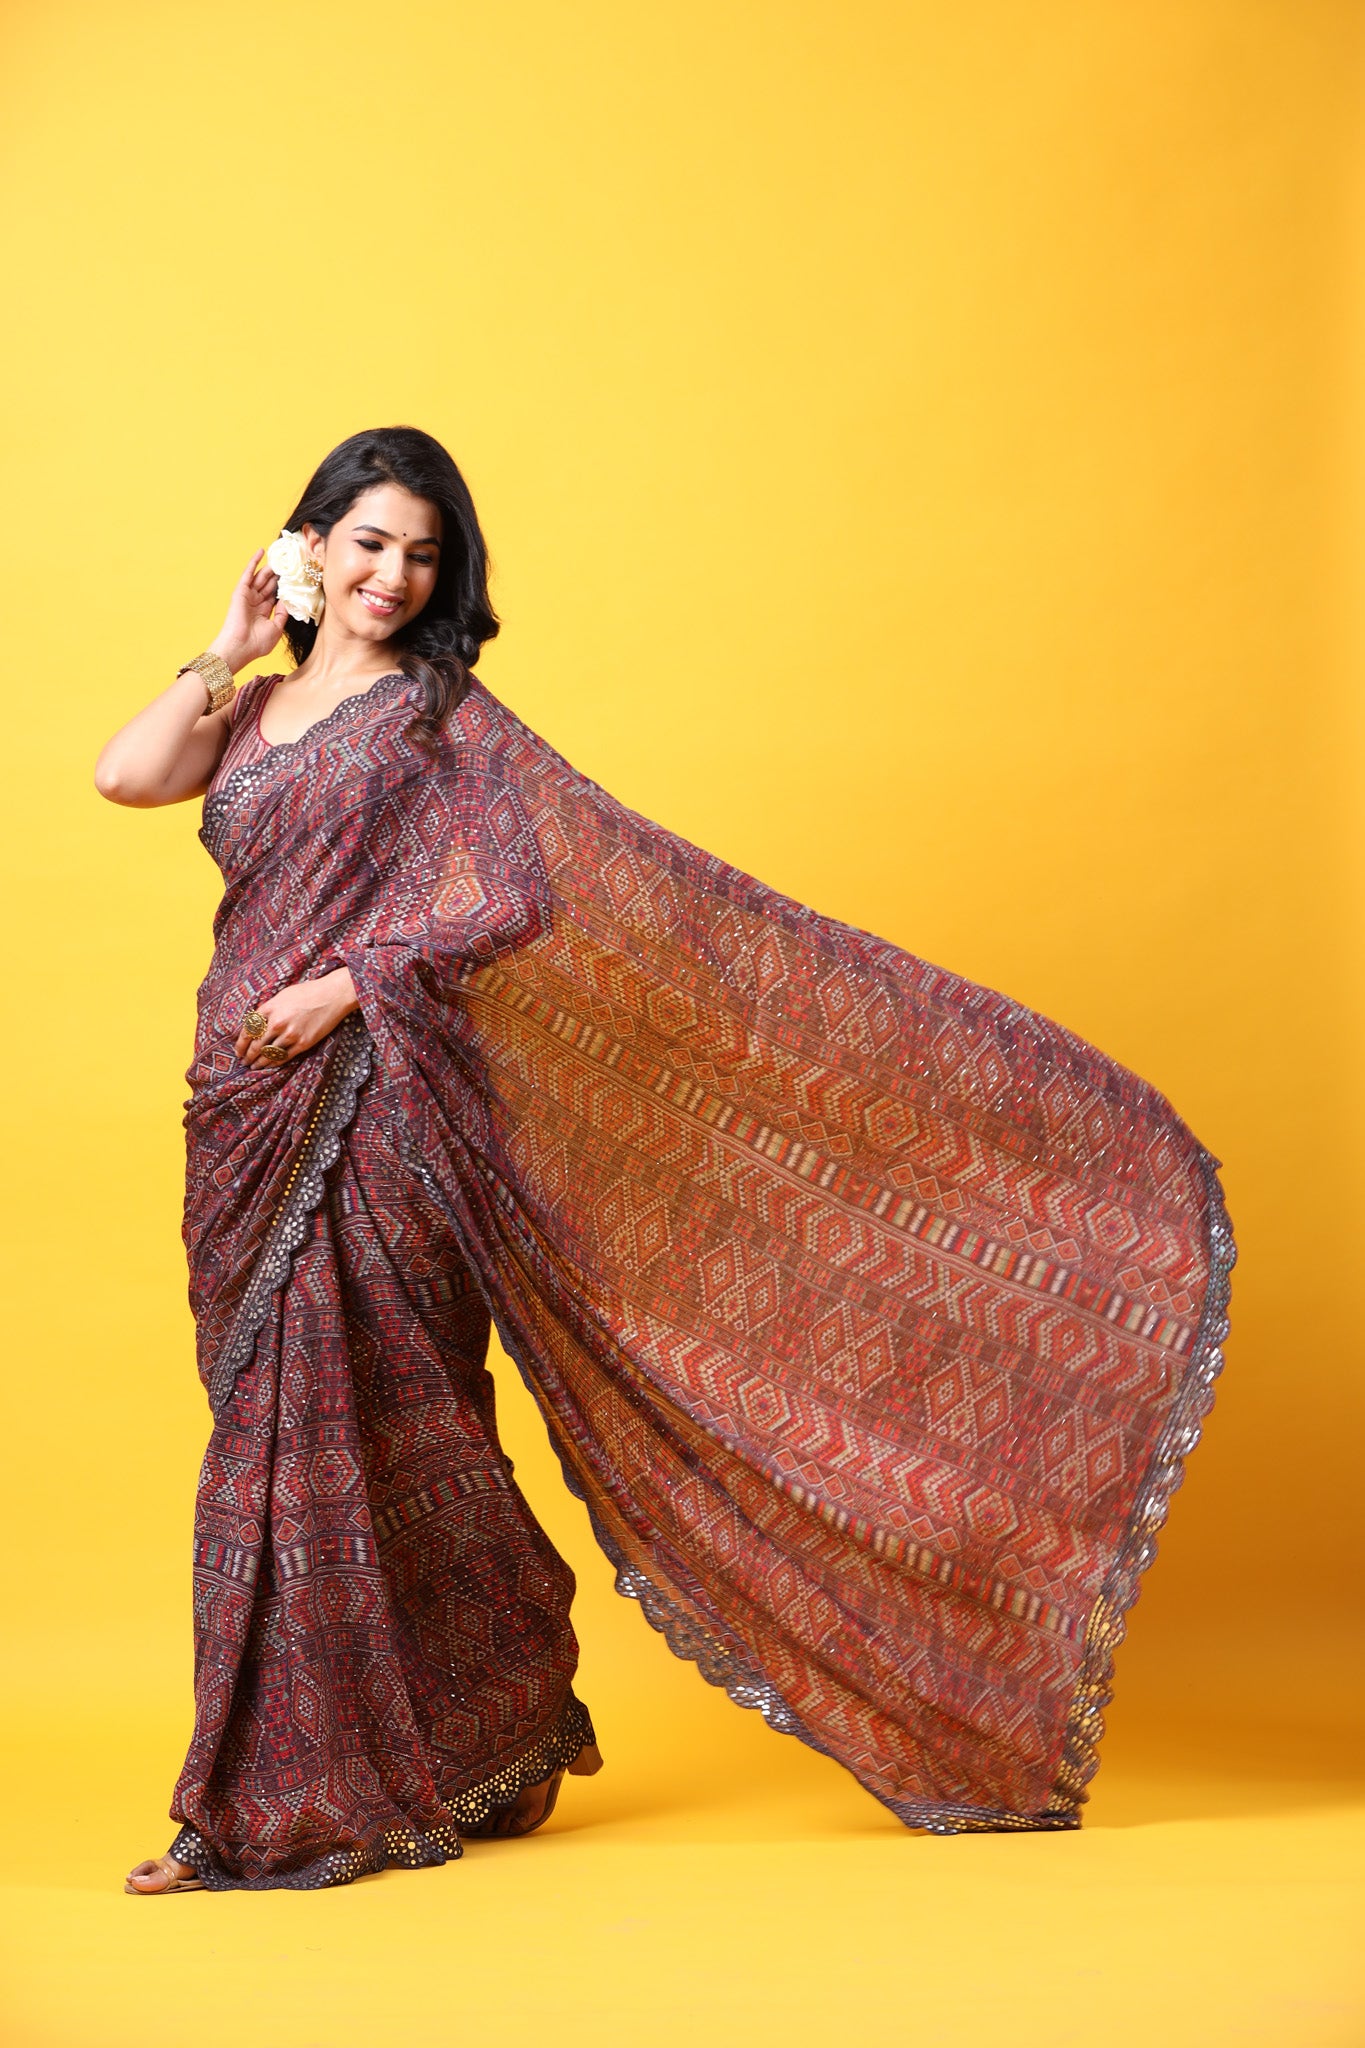 Buy multicolor printed georgette saree online in USA with scalloped border. Make a fashion statement at weddings with stunning designer sarees, embroidered sarees with blouse, wedding sarees, handloom sarees from Pure Elegance Indian fashion store in USA.-pallu